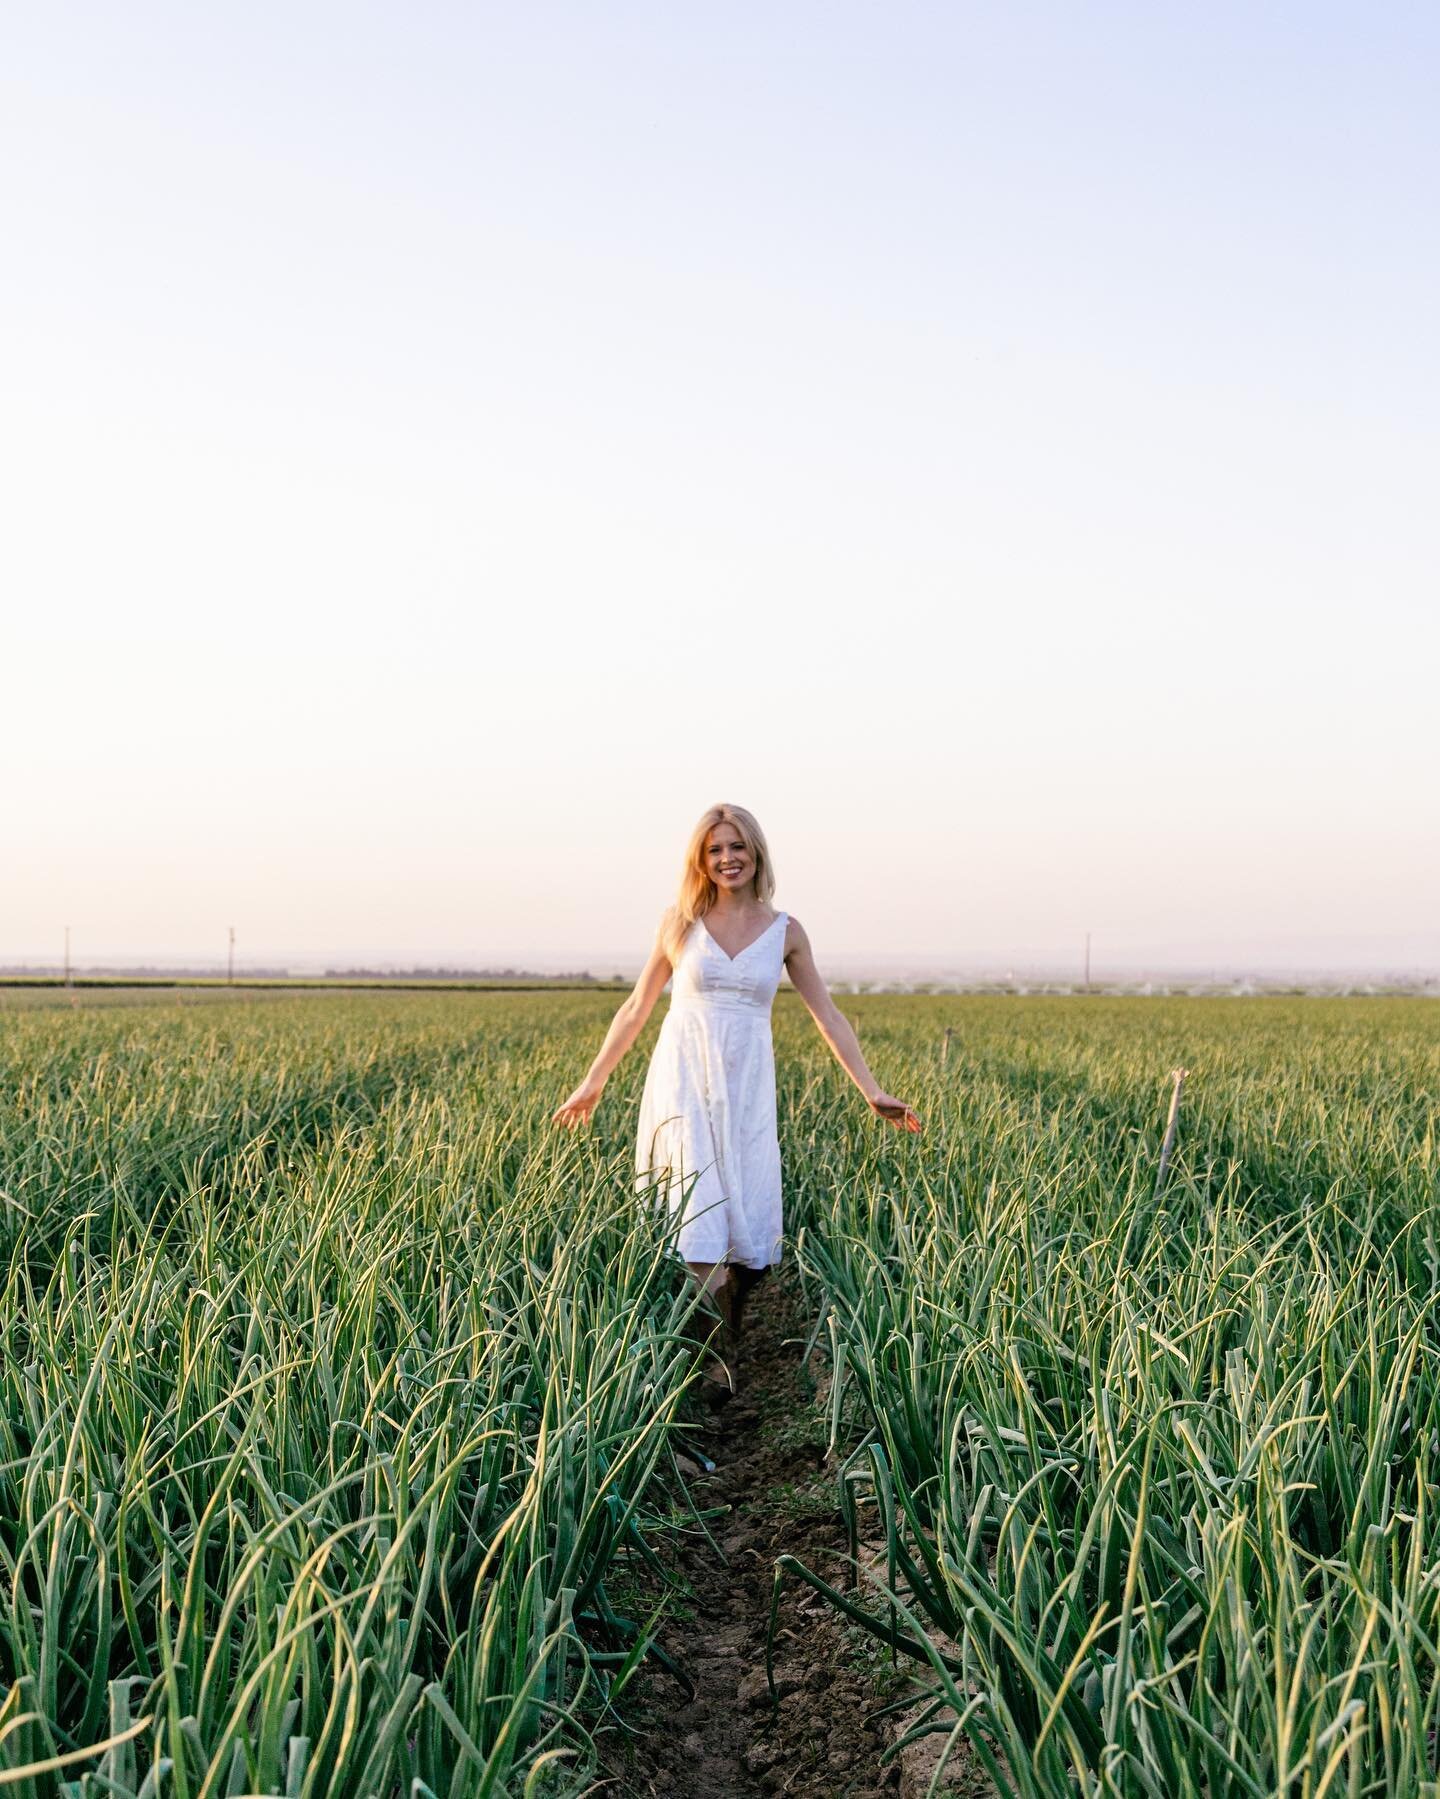 Happy #FarmFashionFriday! I&rsquo;ve been loving sun dresses this summer and its going to be a hot weekend. I love how this white dress looks against the green in this @bakosweet yellow onion field! I hope you all had a great week and have a wonderfu